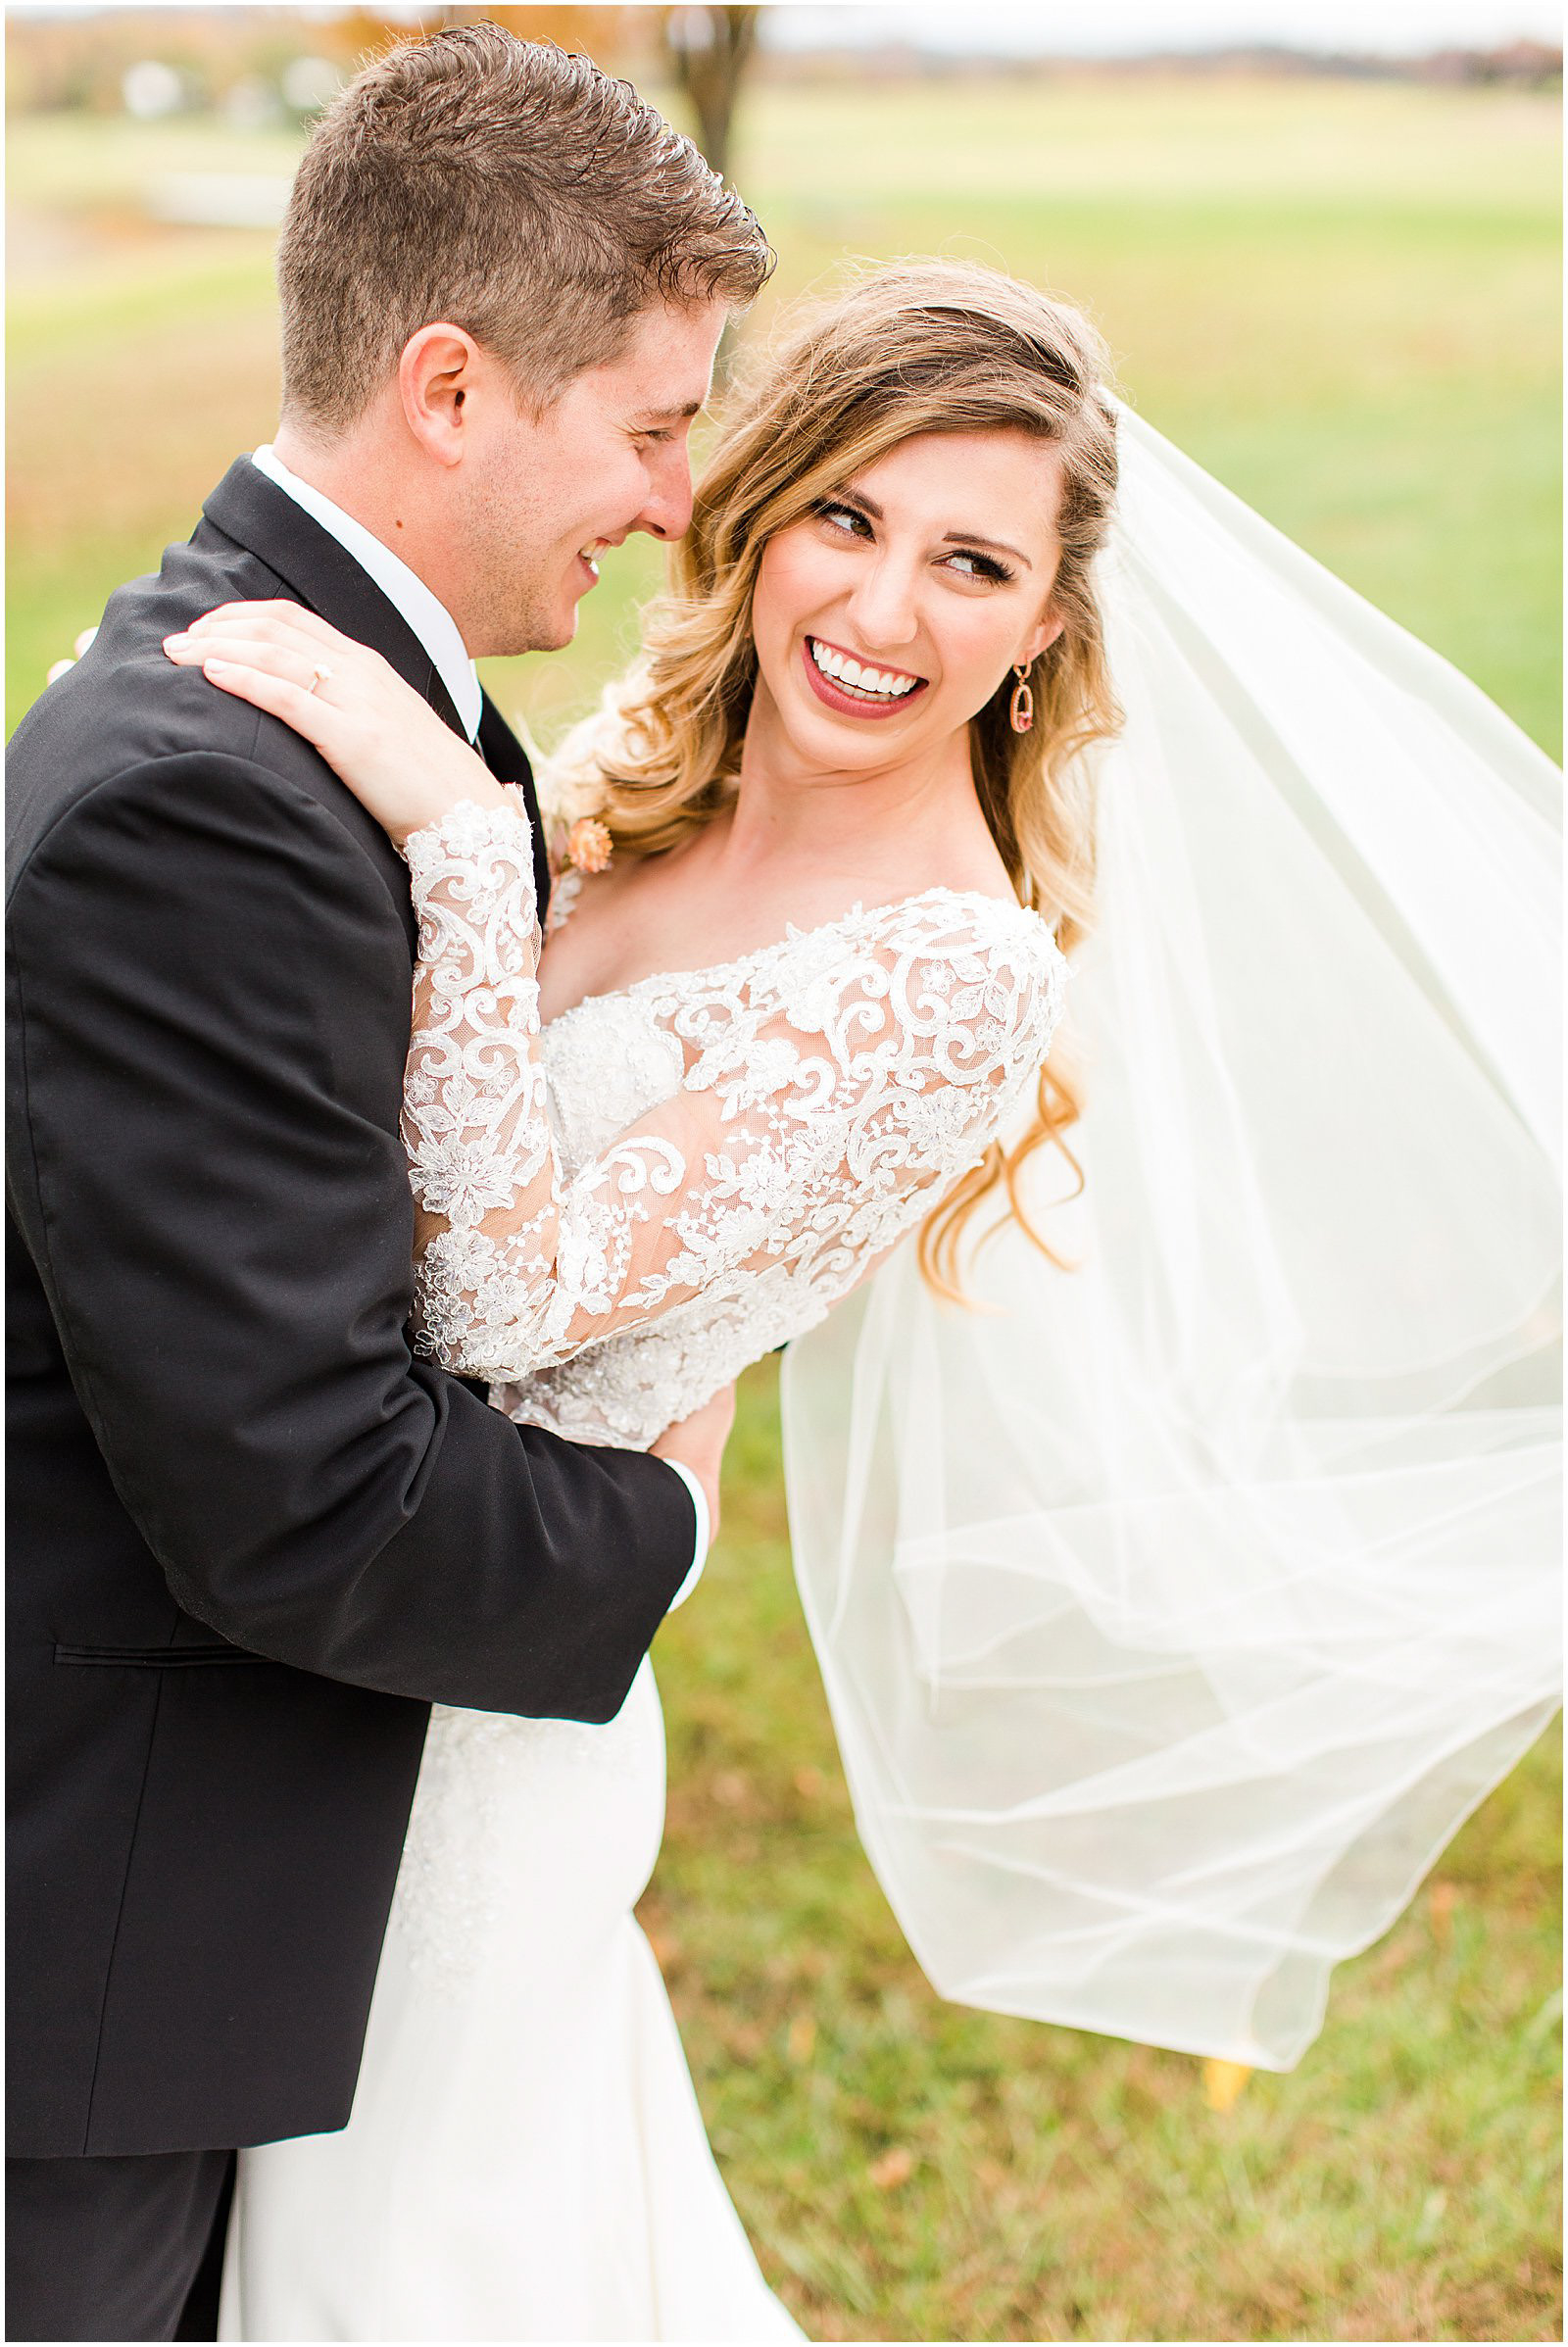 A Romantic Fall Wedding in Ferdinand, IN | Tori and Kyle | Bret and Brandie Photography 0056.jpg